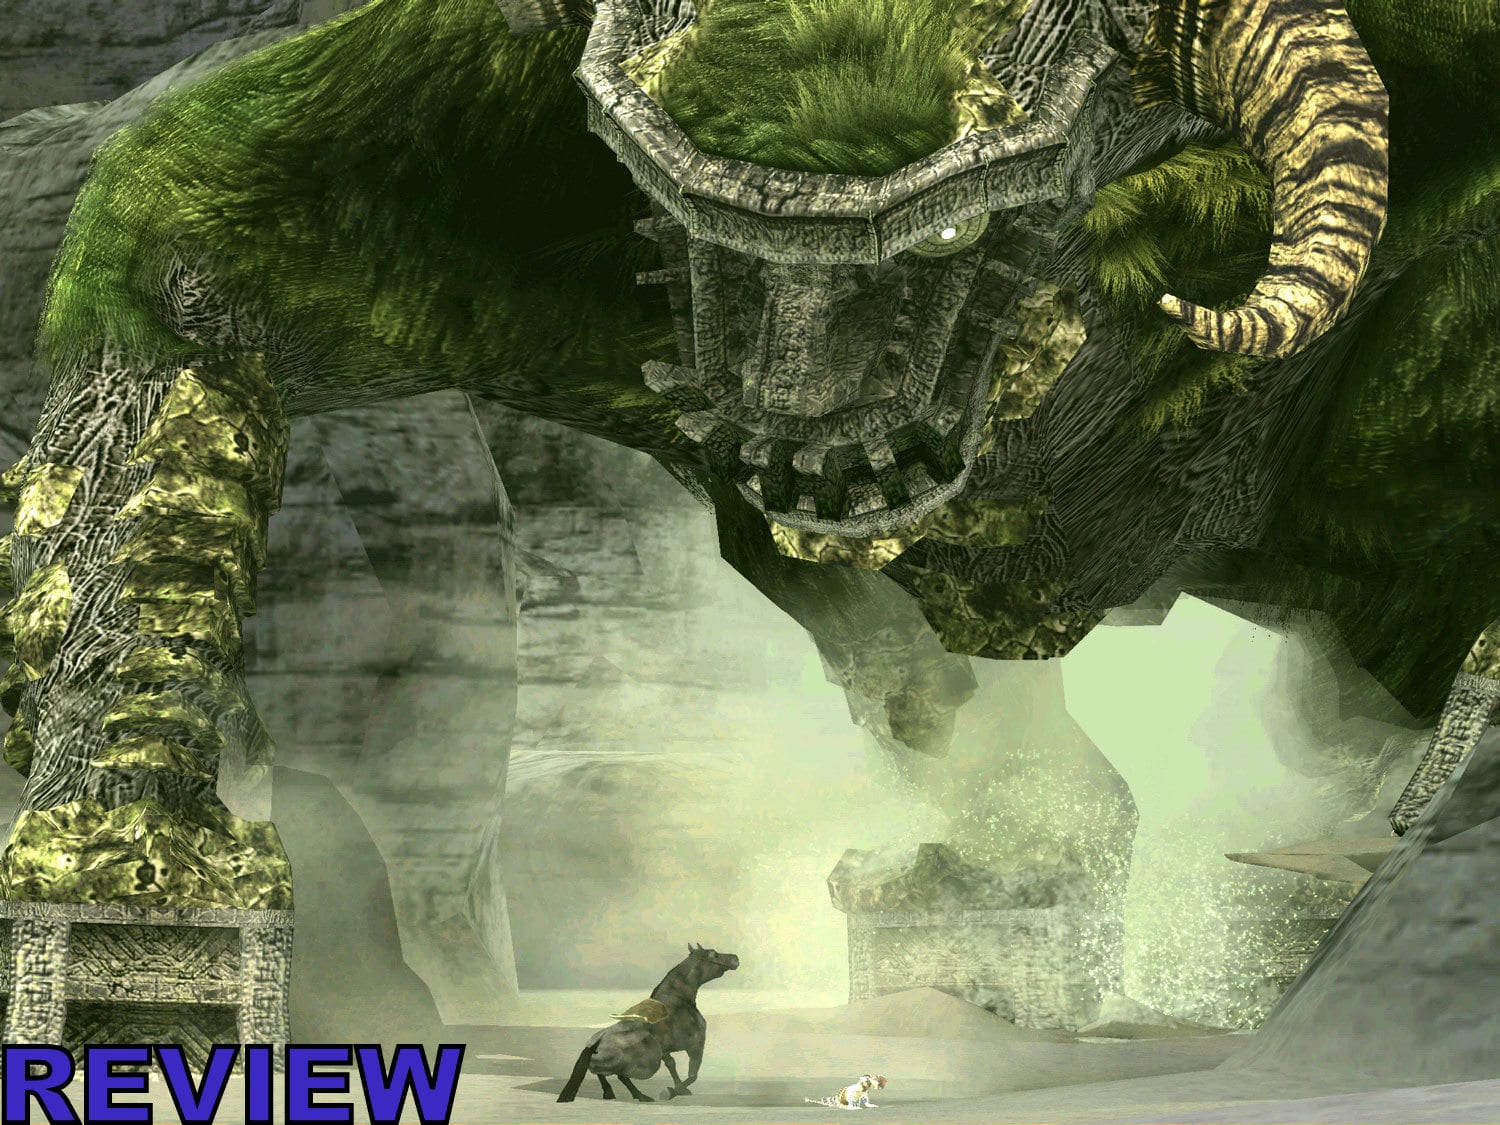 Ico and Shadow of the Colossus: Telling stories through setting and gesture